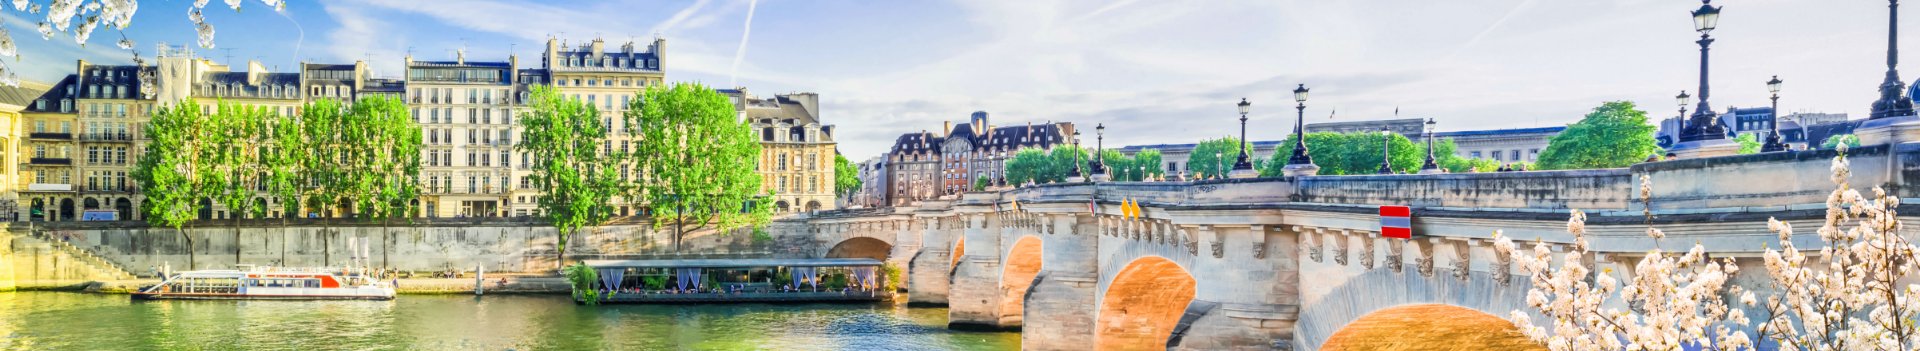 Reasons to Choose the Seine for Your Next River Cruise | AMA Travel